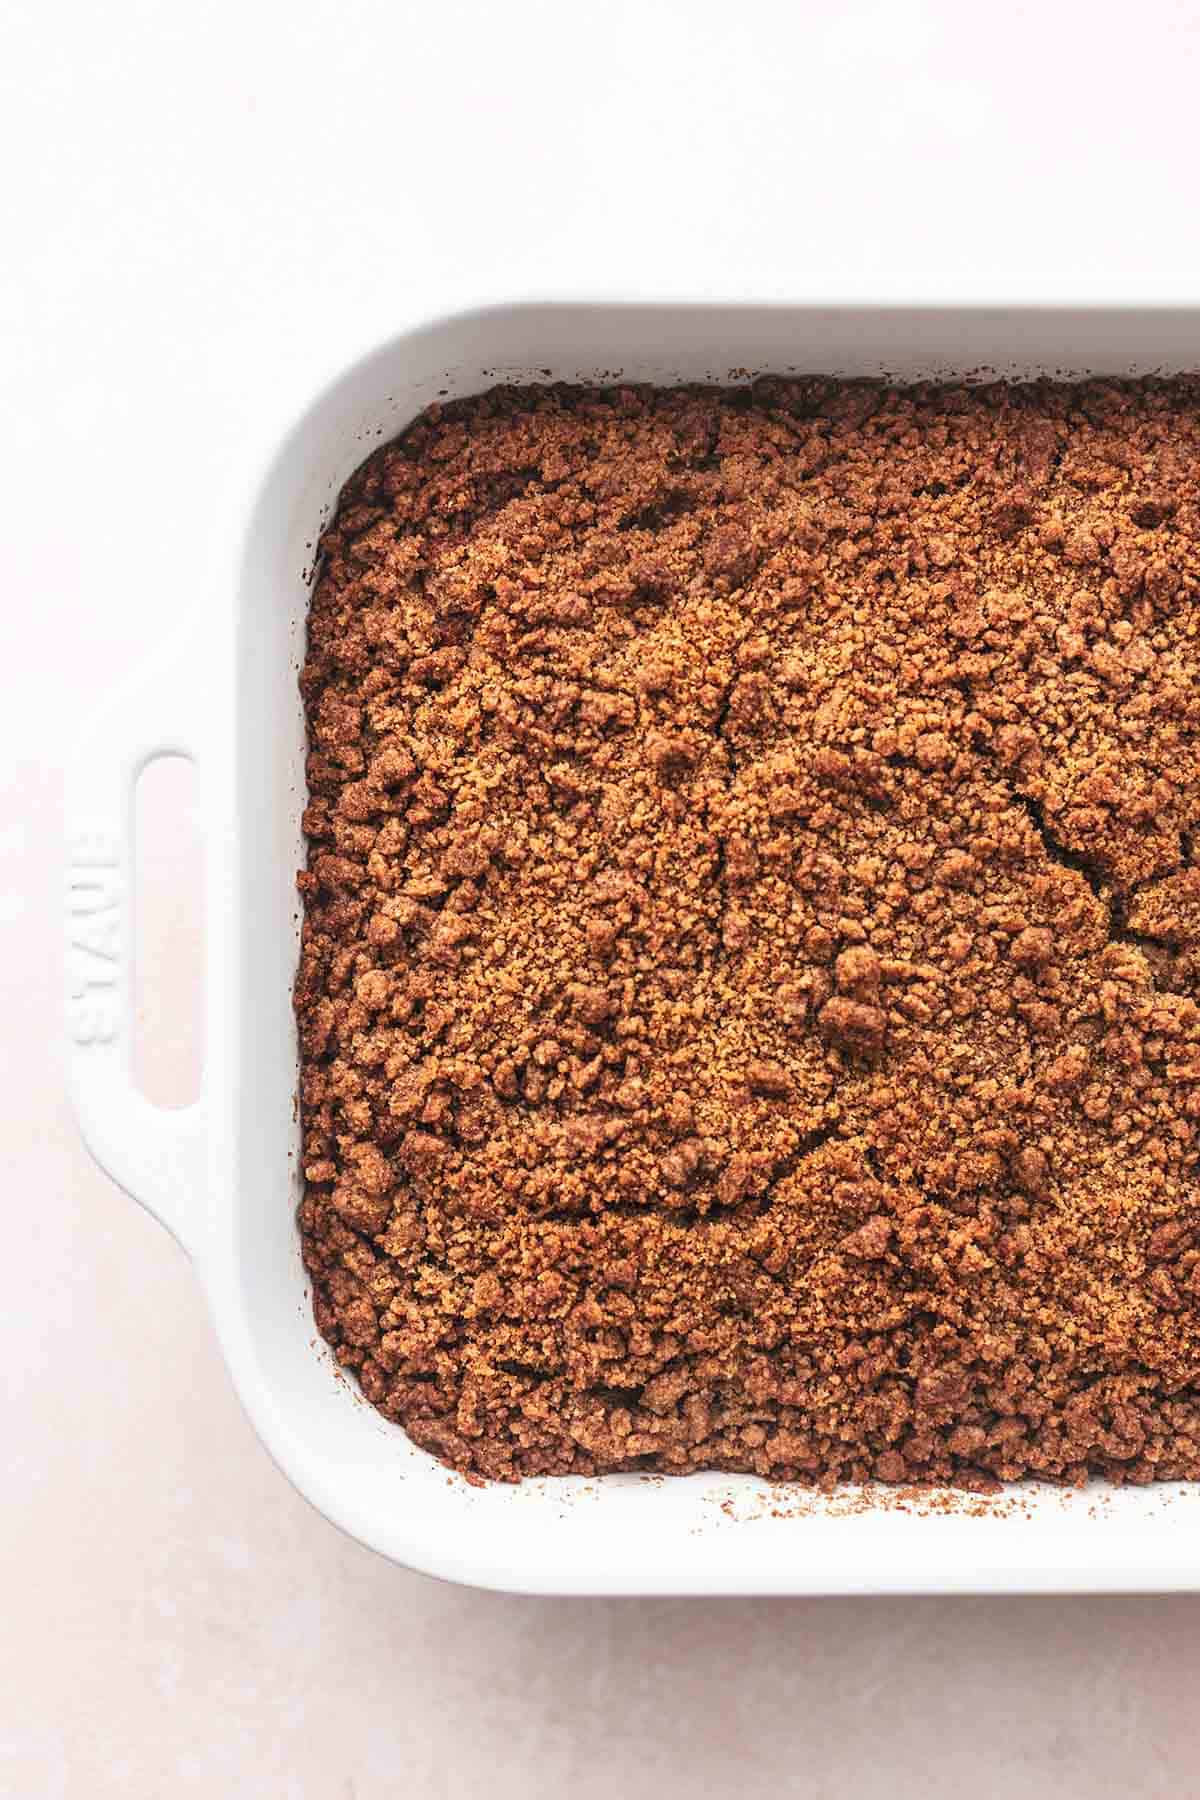 close up top view of apple cinnamon coffee cake in a baking pan.